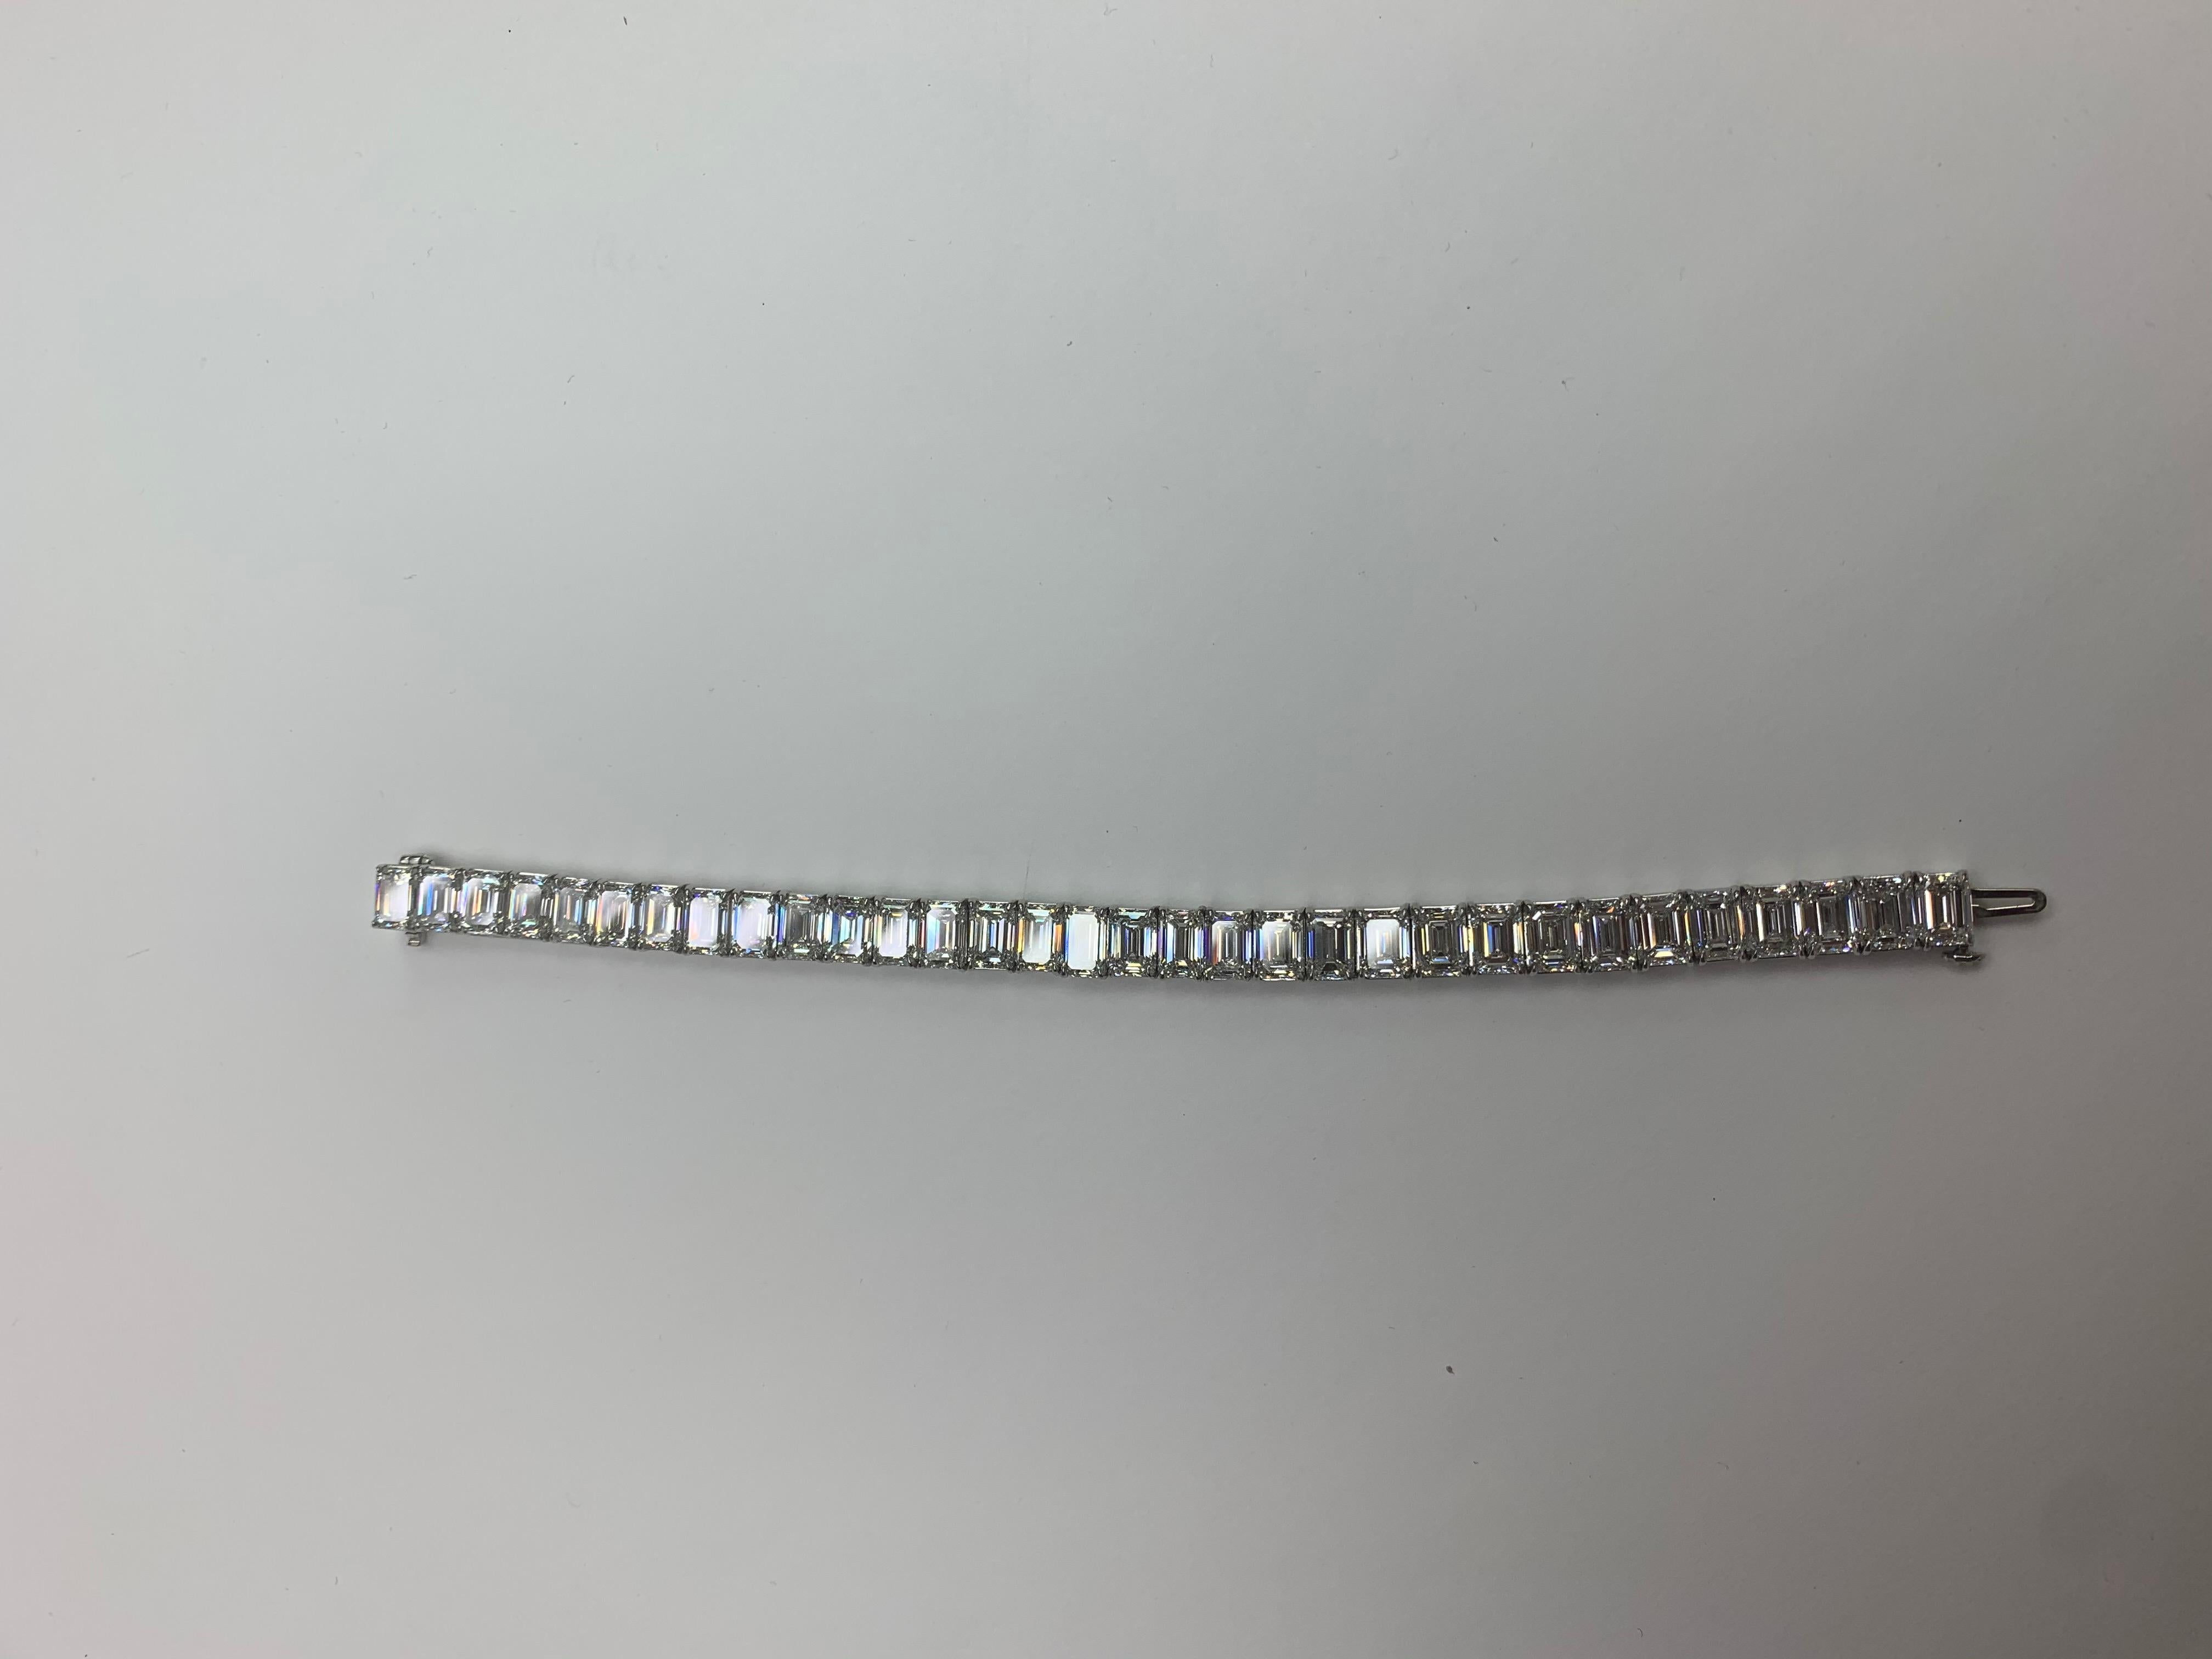 32 Emerald Cut Diamonds are set in Platinum Tennis Bracelet.
Super Classy Bracelet with all GIA certified Diamonds. The Diamonds are certified to be G and H in Color and VS2 to IF in Clarity. 
A Breakdown of the Individual Diamond and its GIA